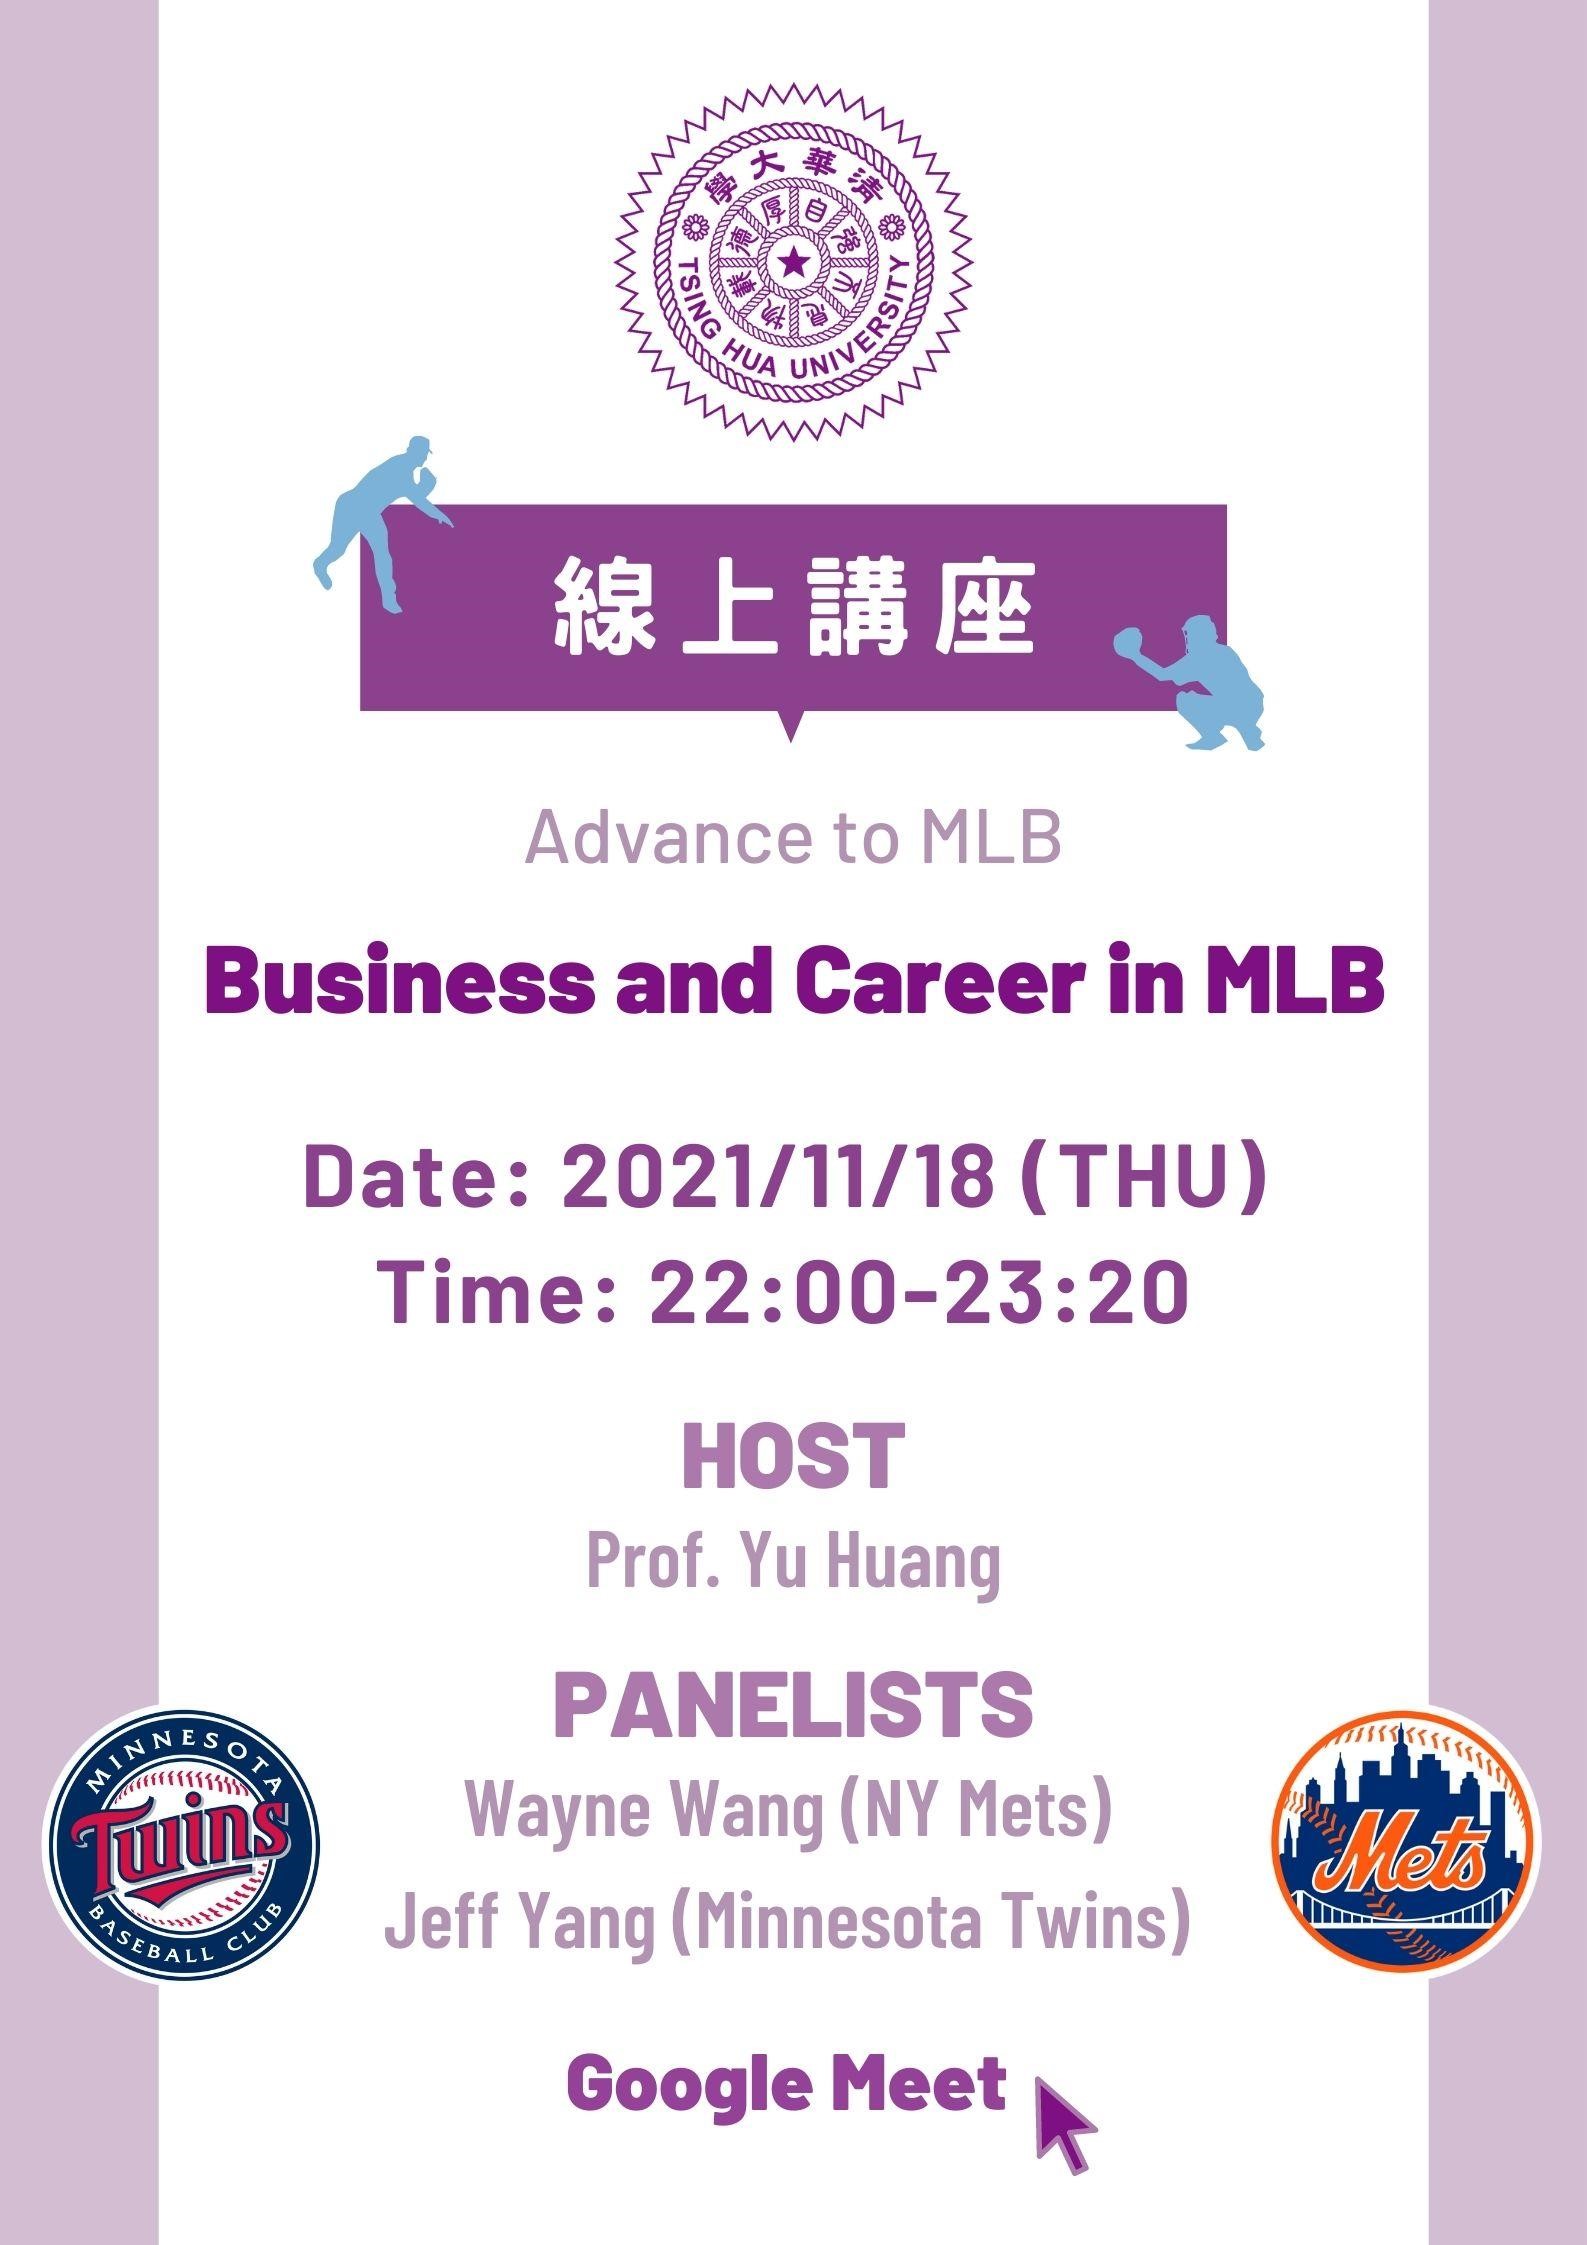 Business and Career in MLB